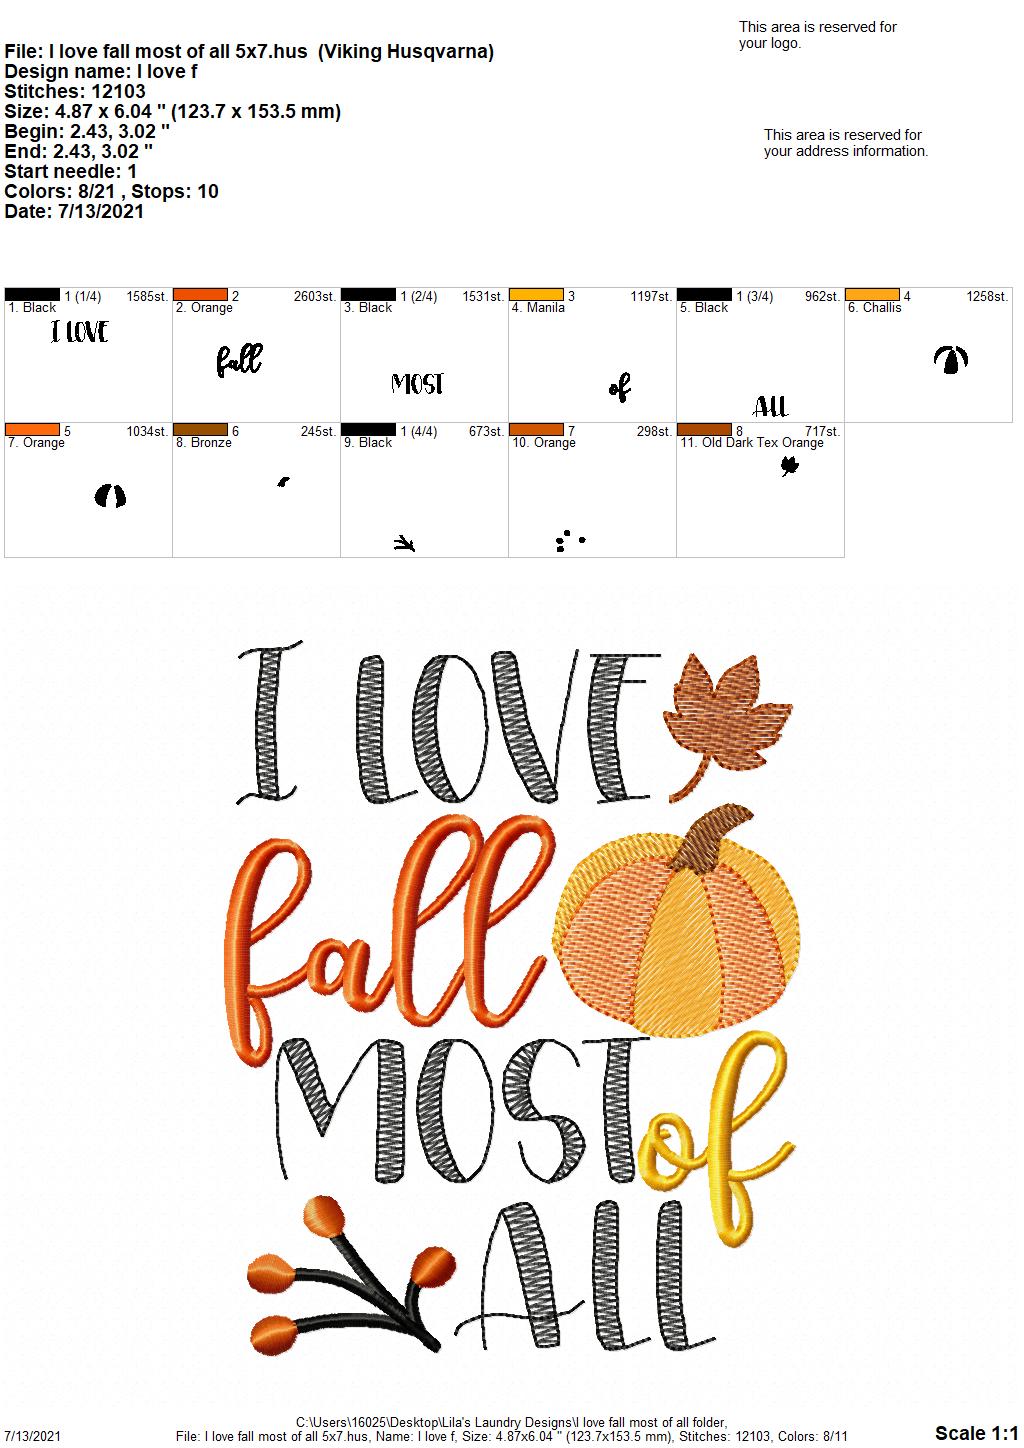 I Love Fall Most of All - 3 sizes- Digital Embroidery Design